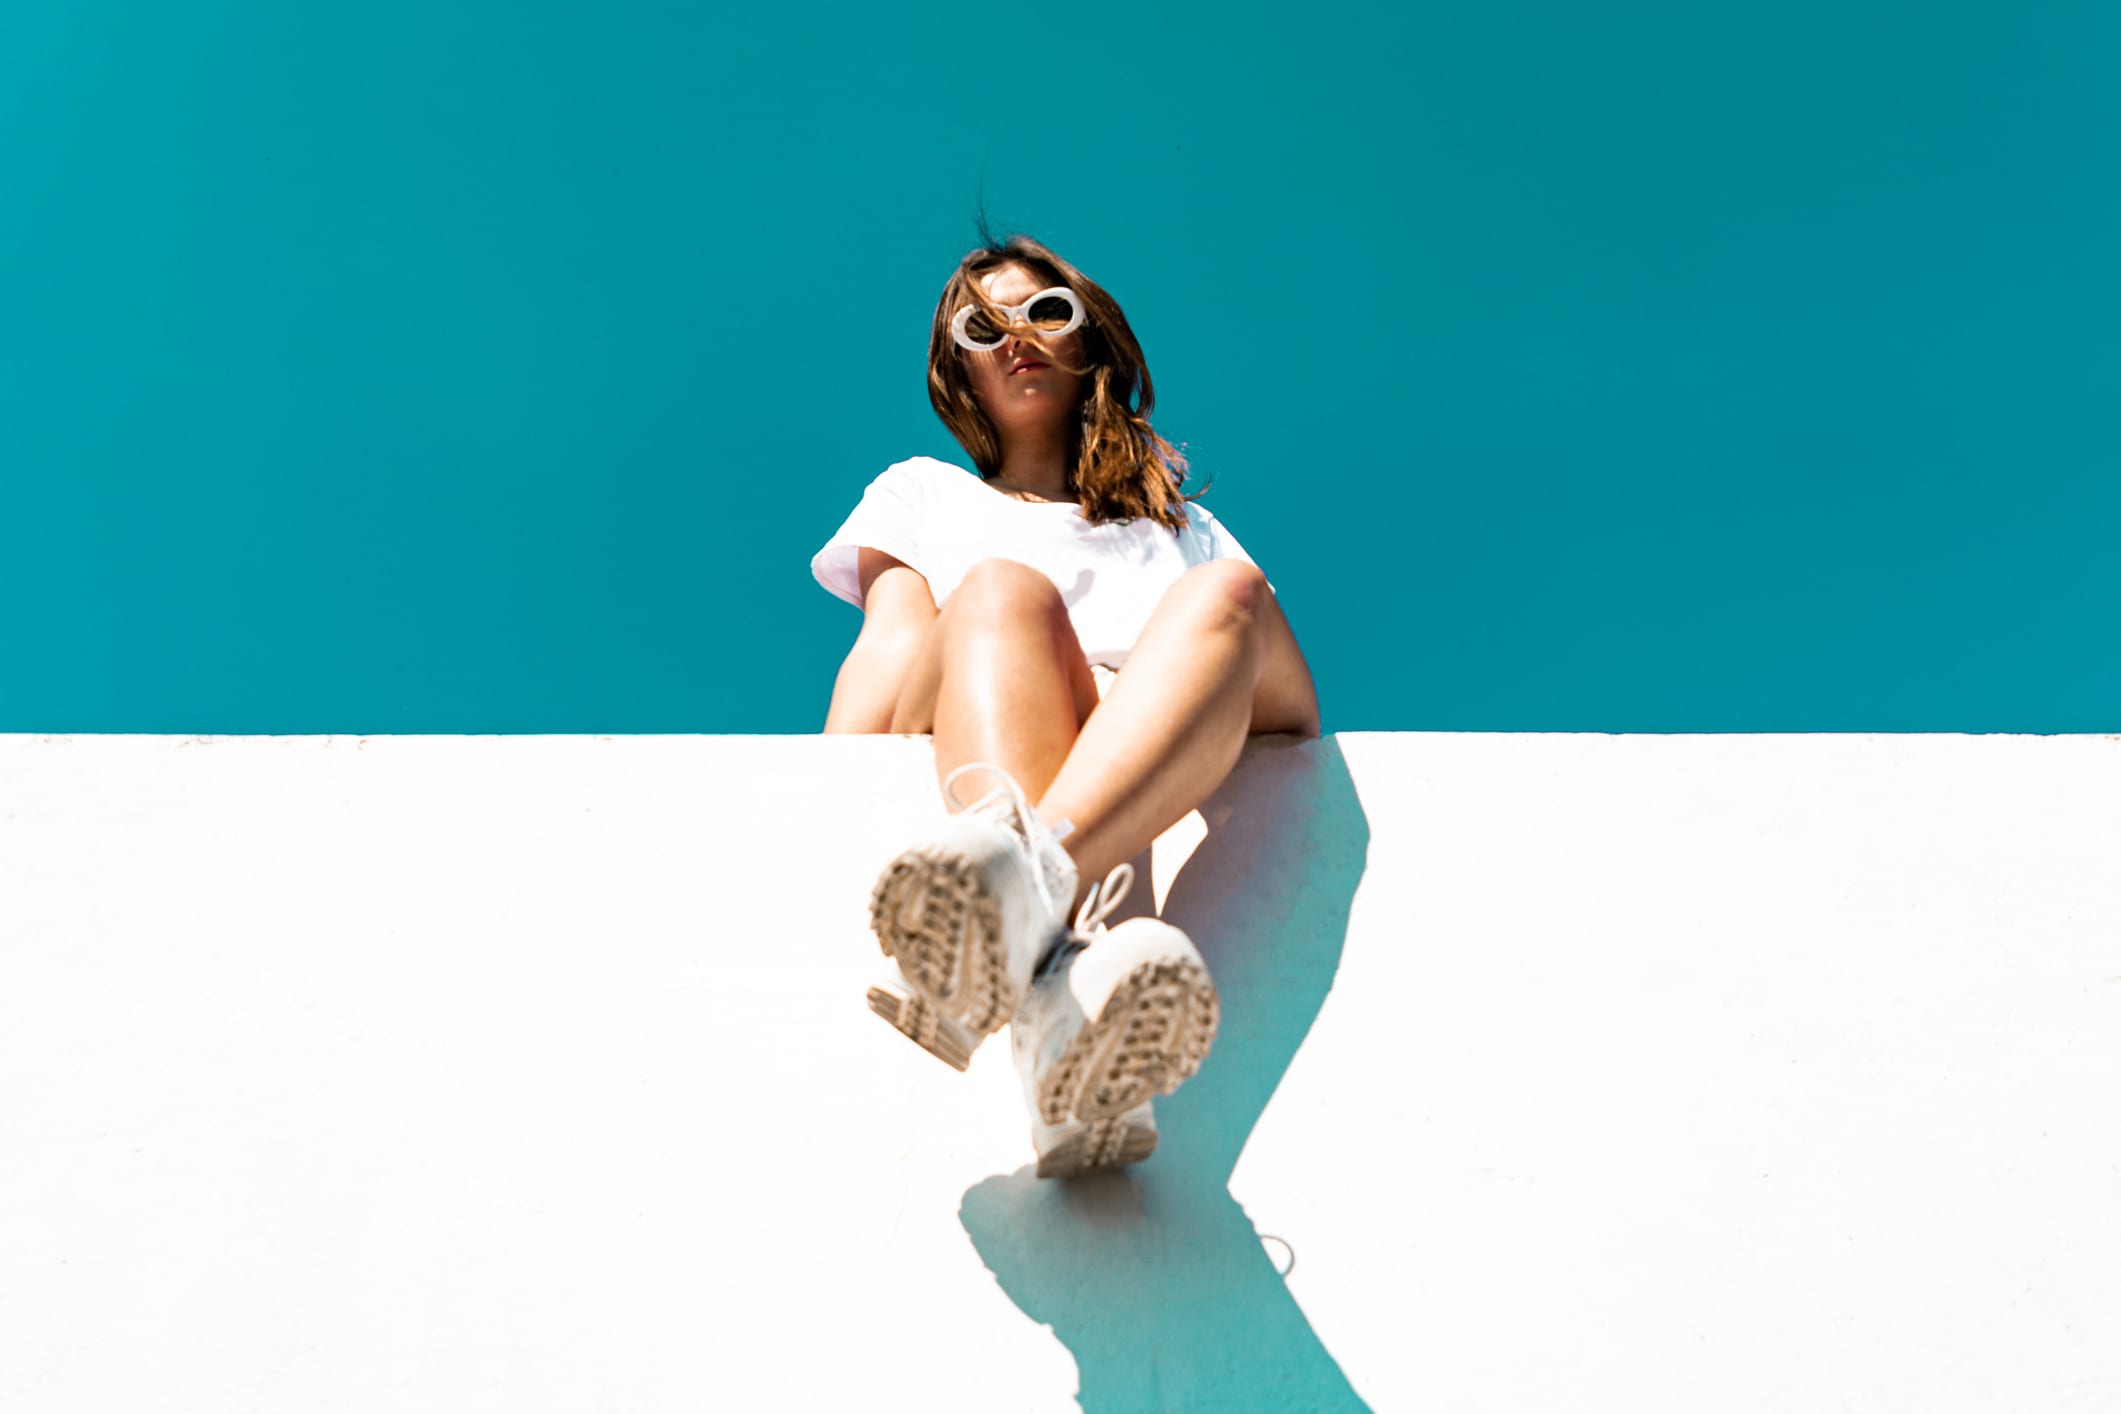 Young woman wearing large white sunglasses sitting on modern concrete wall. Simplicity Modern Urban Style. Shot from below against the sky. Urban Lifestyle Youth Portrait.